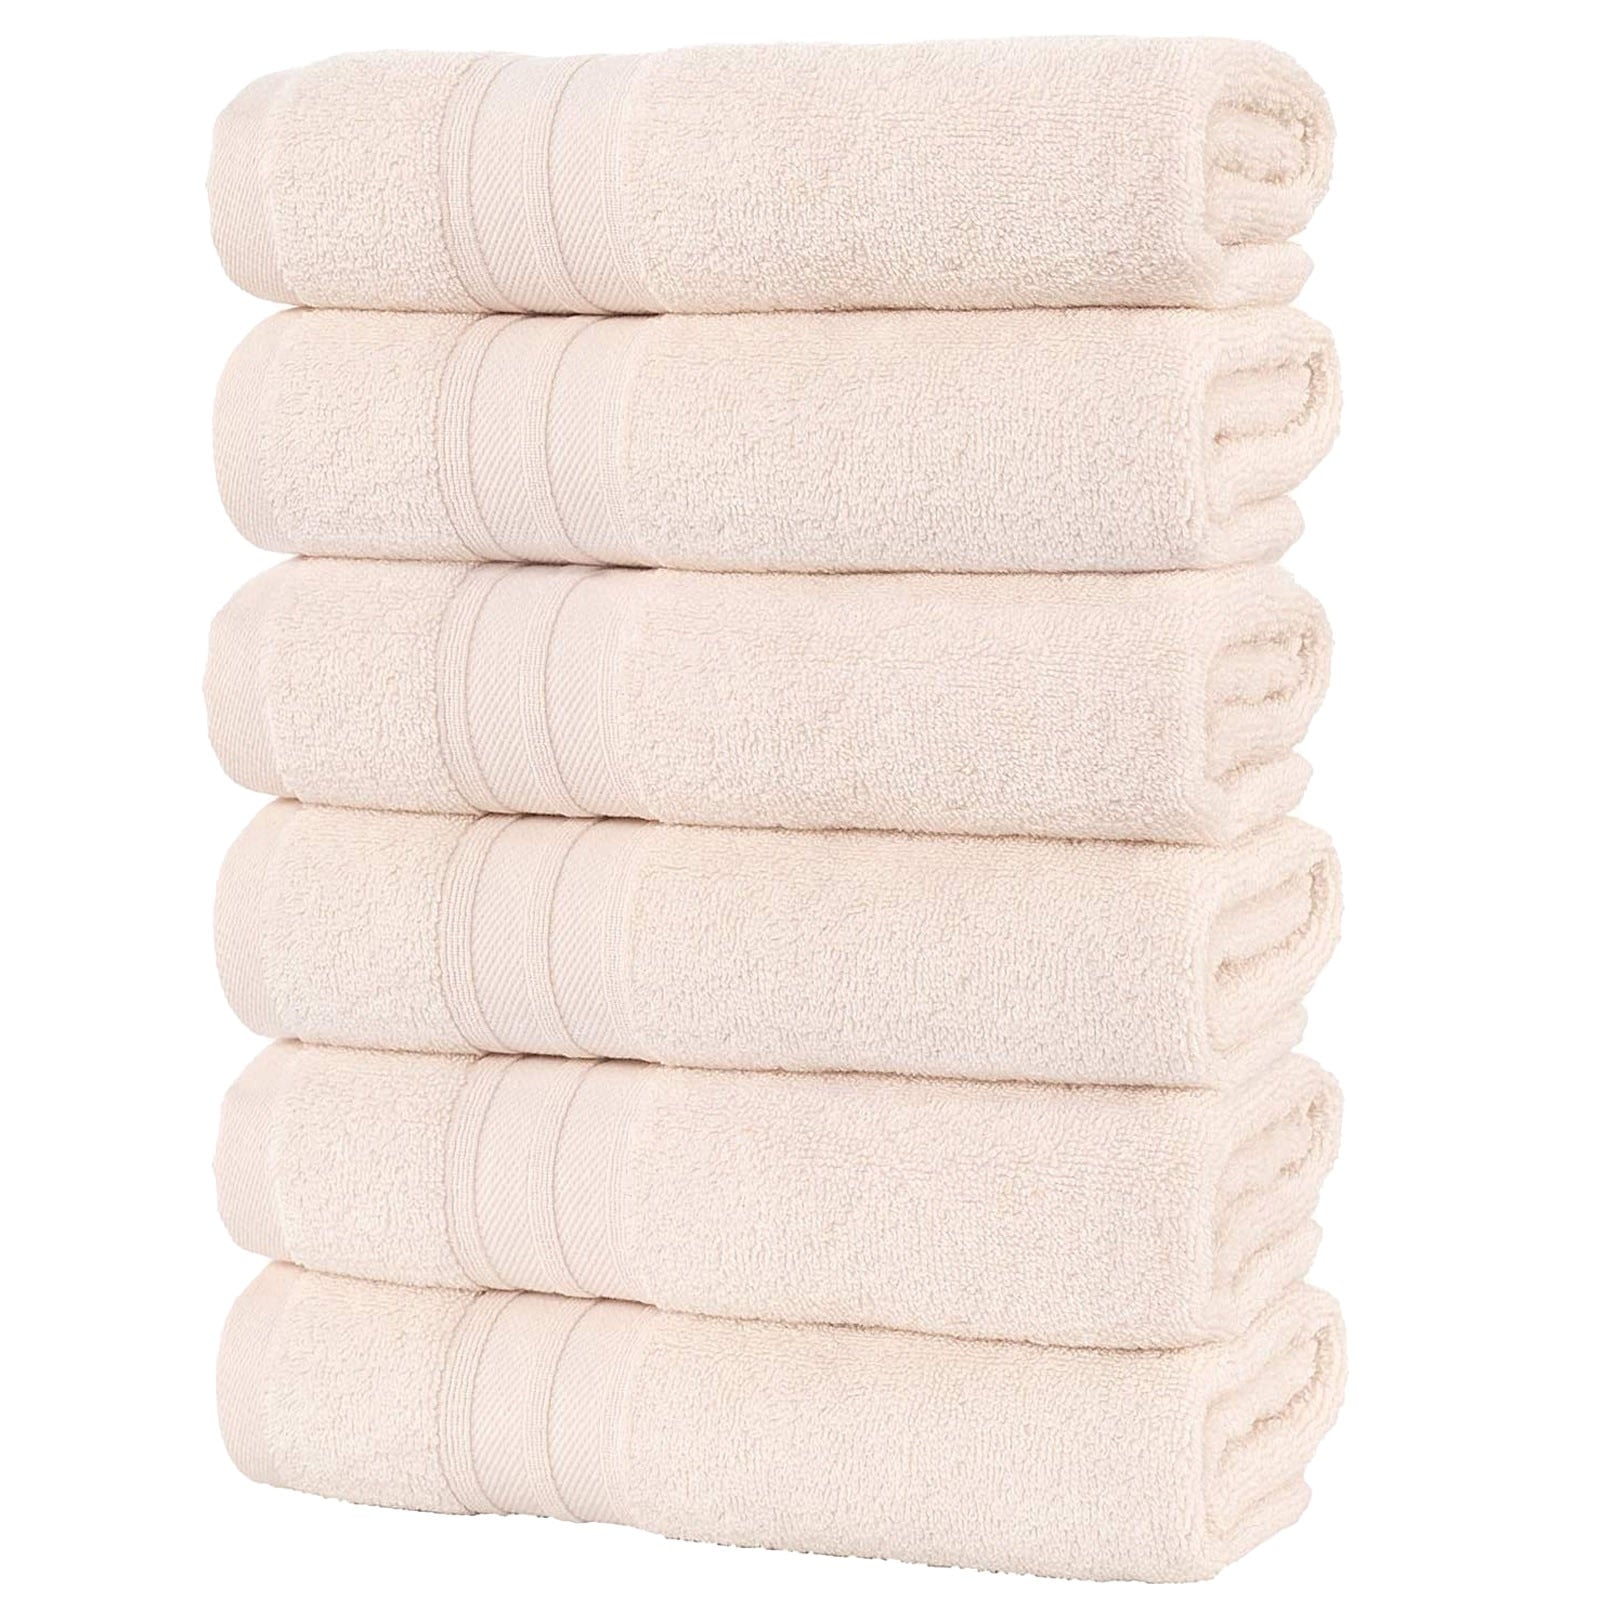 Pretty Comy - Cotton Solid Soft Face Towel/Bath Towel/Hair Towel 4 times  absorbs Water Extra Large Hand Washing Body Towels Whole Pure Cotton -  Luxurious Rayon Trim（Green,13.38 x 29.5） 